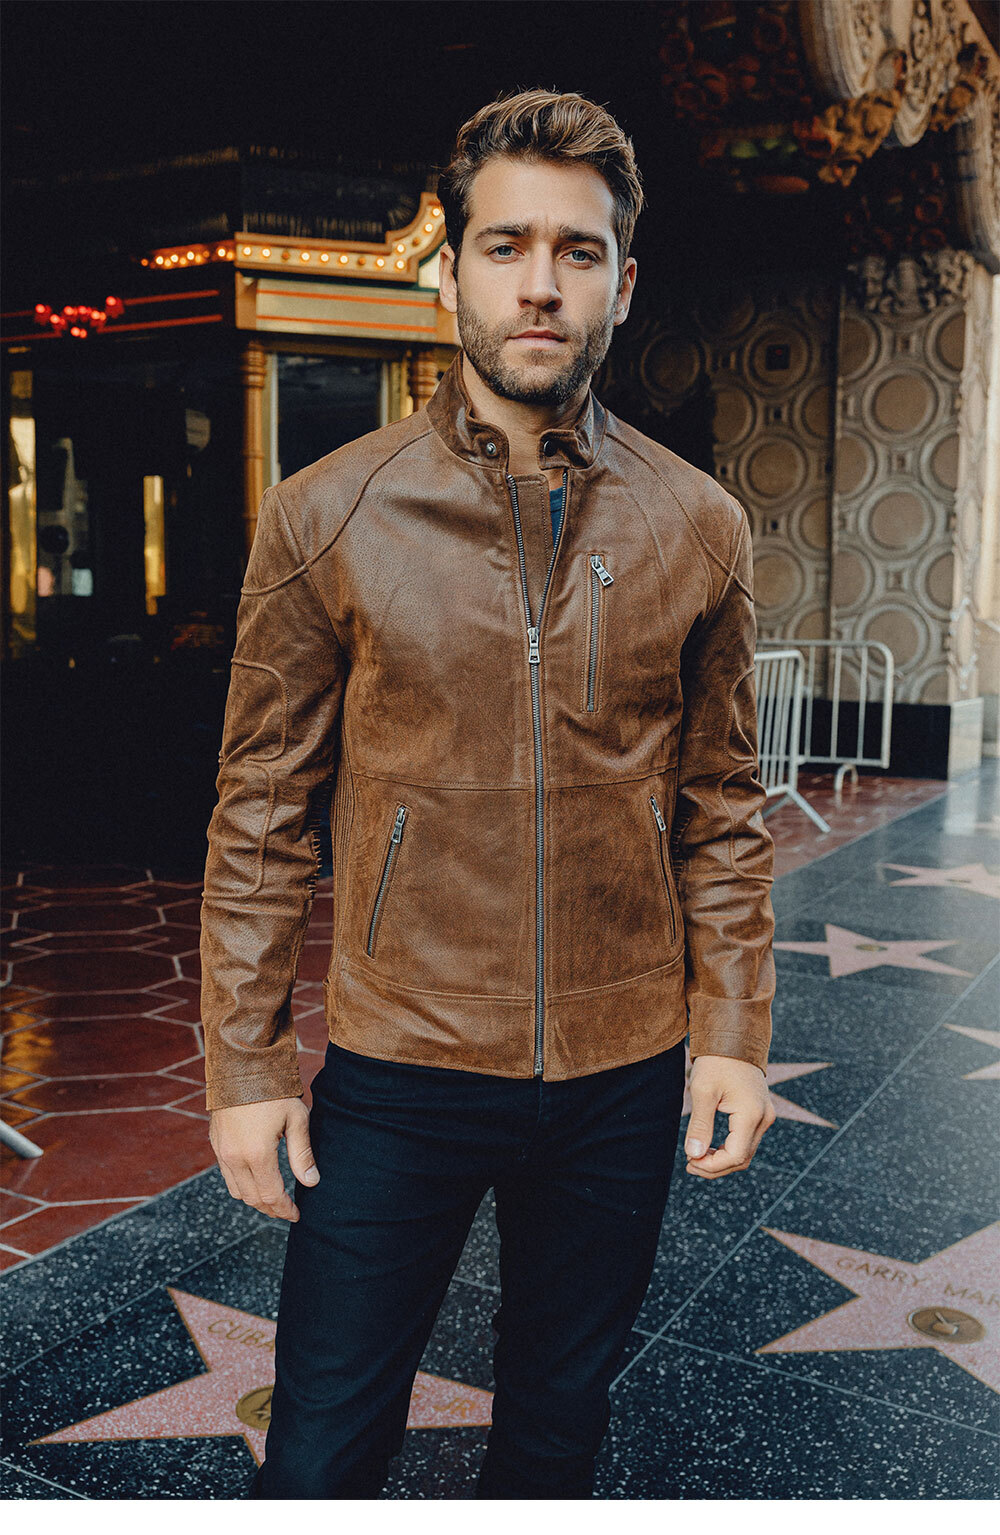 New Men's Pigskin Real Leather Jacket Motorcycle Jacket Classic Coat with Stand Collar MXGX20-6 